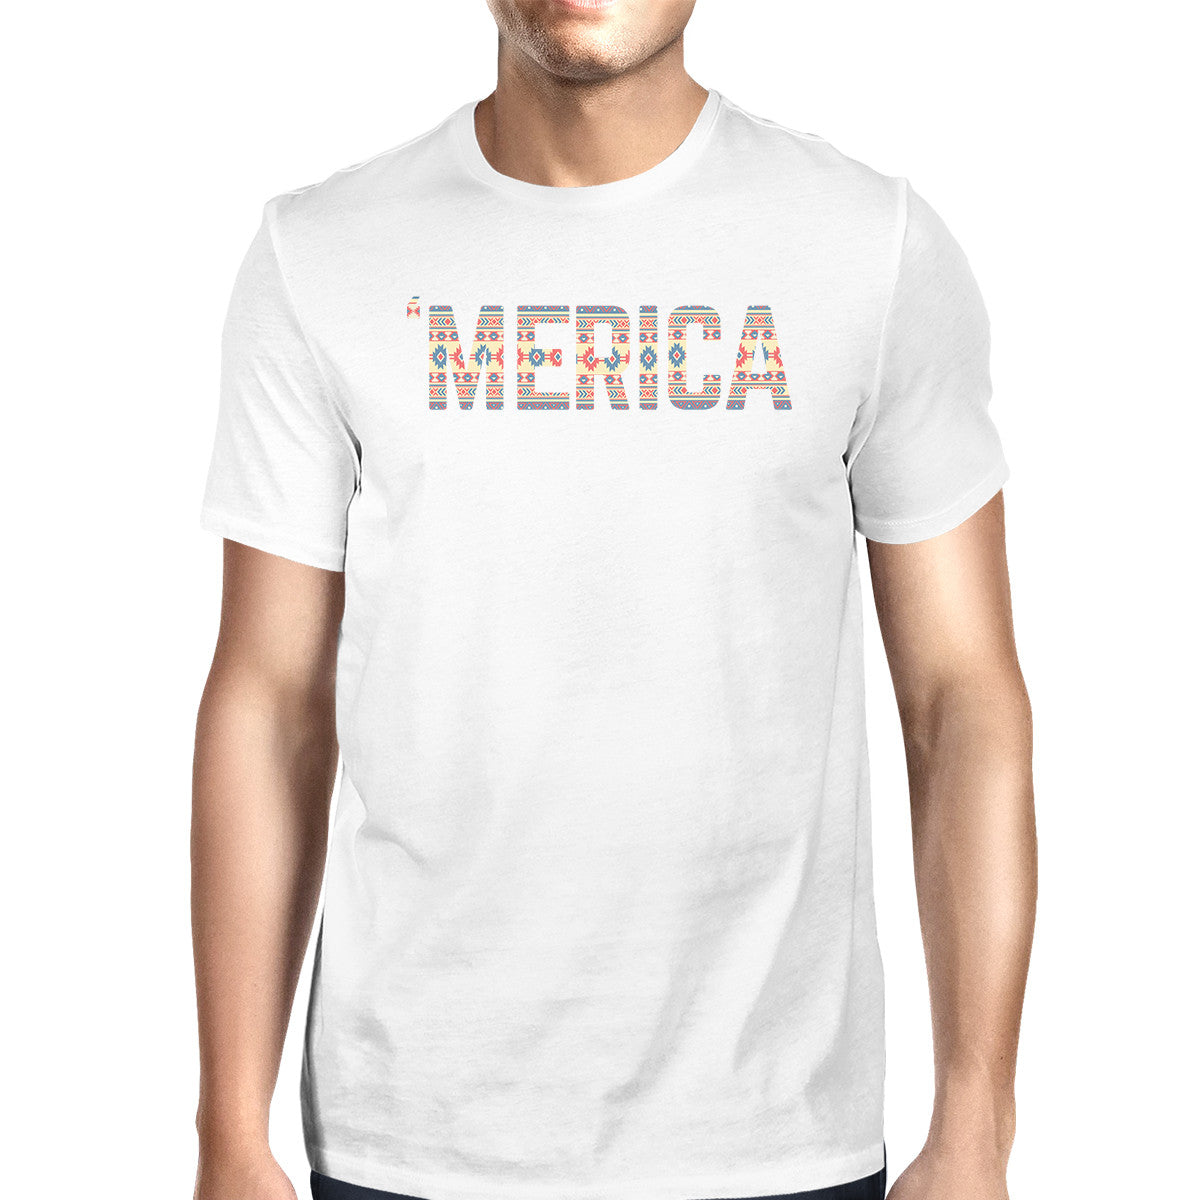 'Merica Mens White T-Shirt Unique Graphic Tee For Fourth Of 